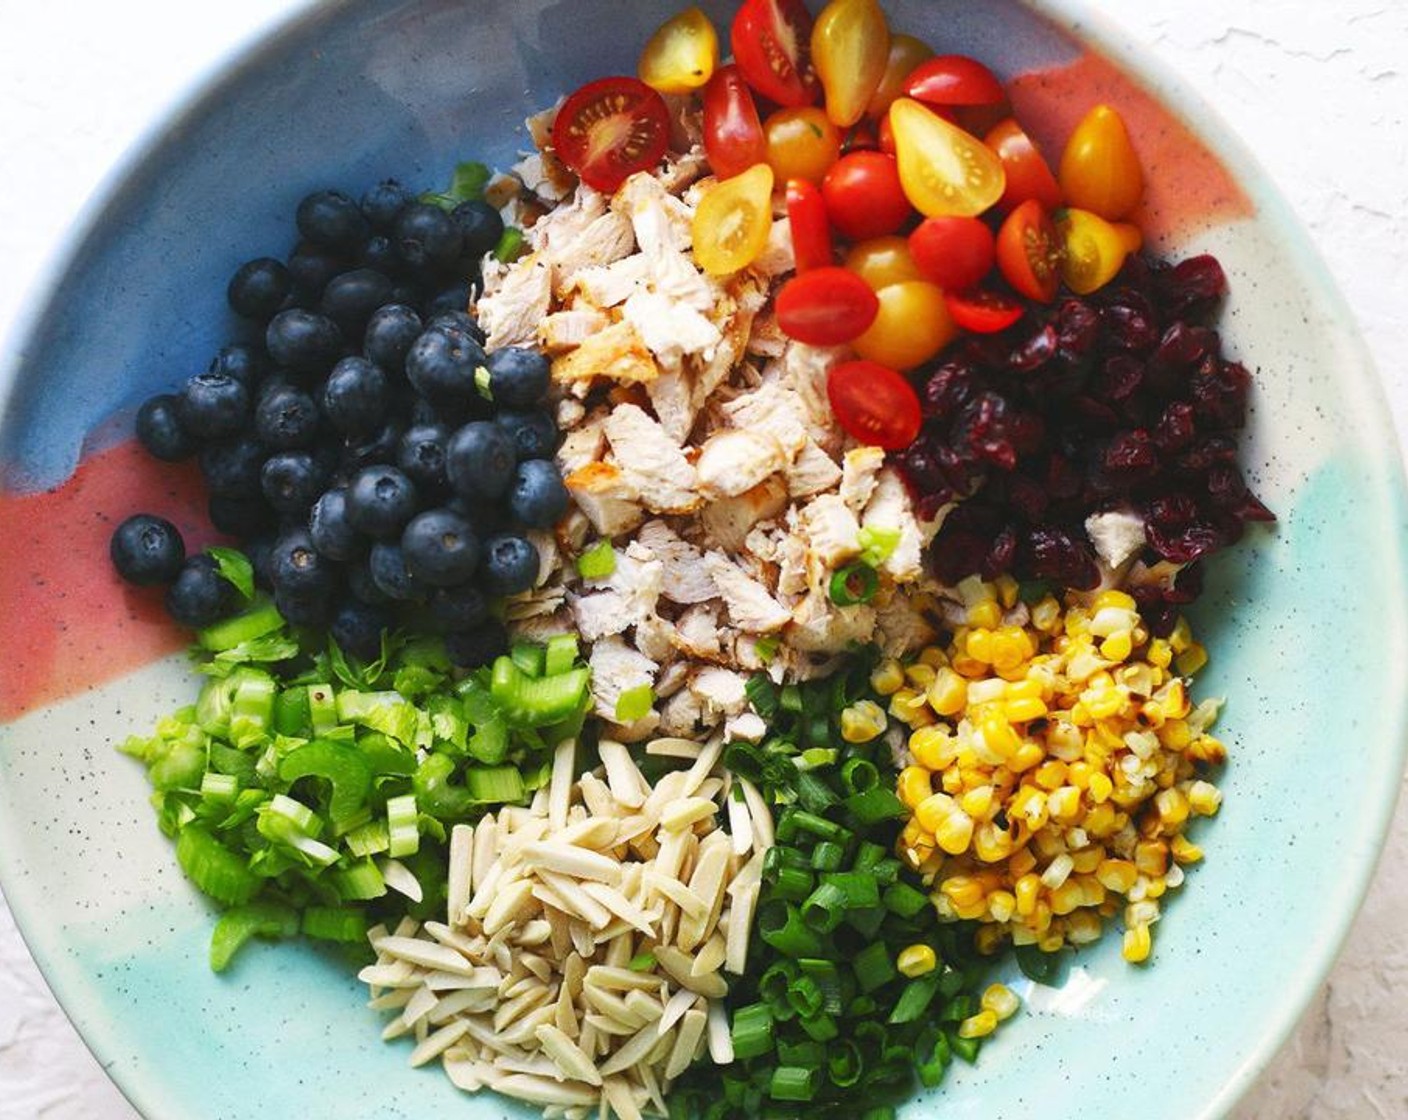 step 1 In a large bowl, place Fresh Blueberry (1 cup), Celery (1 cup), Grape Tomatoes (1 cup), Corn Kernels (1/2 cup), Slivered Almonds (1/2 cup), Scallion (1/2 cup), Dried Cranberries (1/2 cup), and Chicken (4 cups).